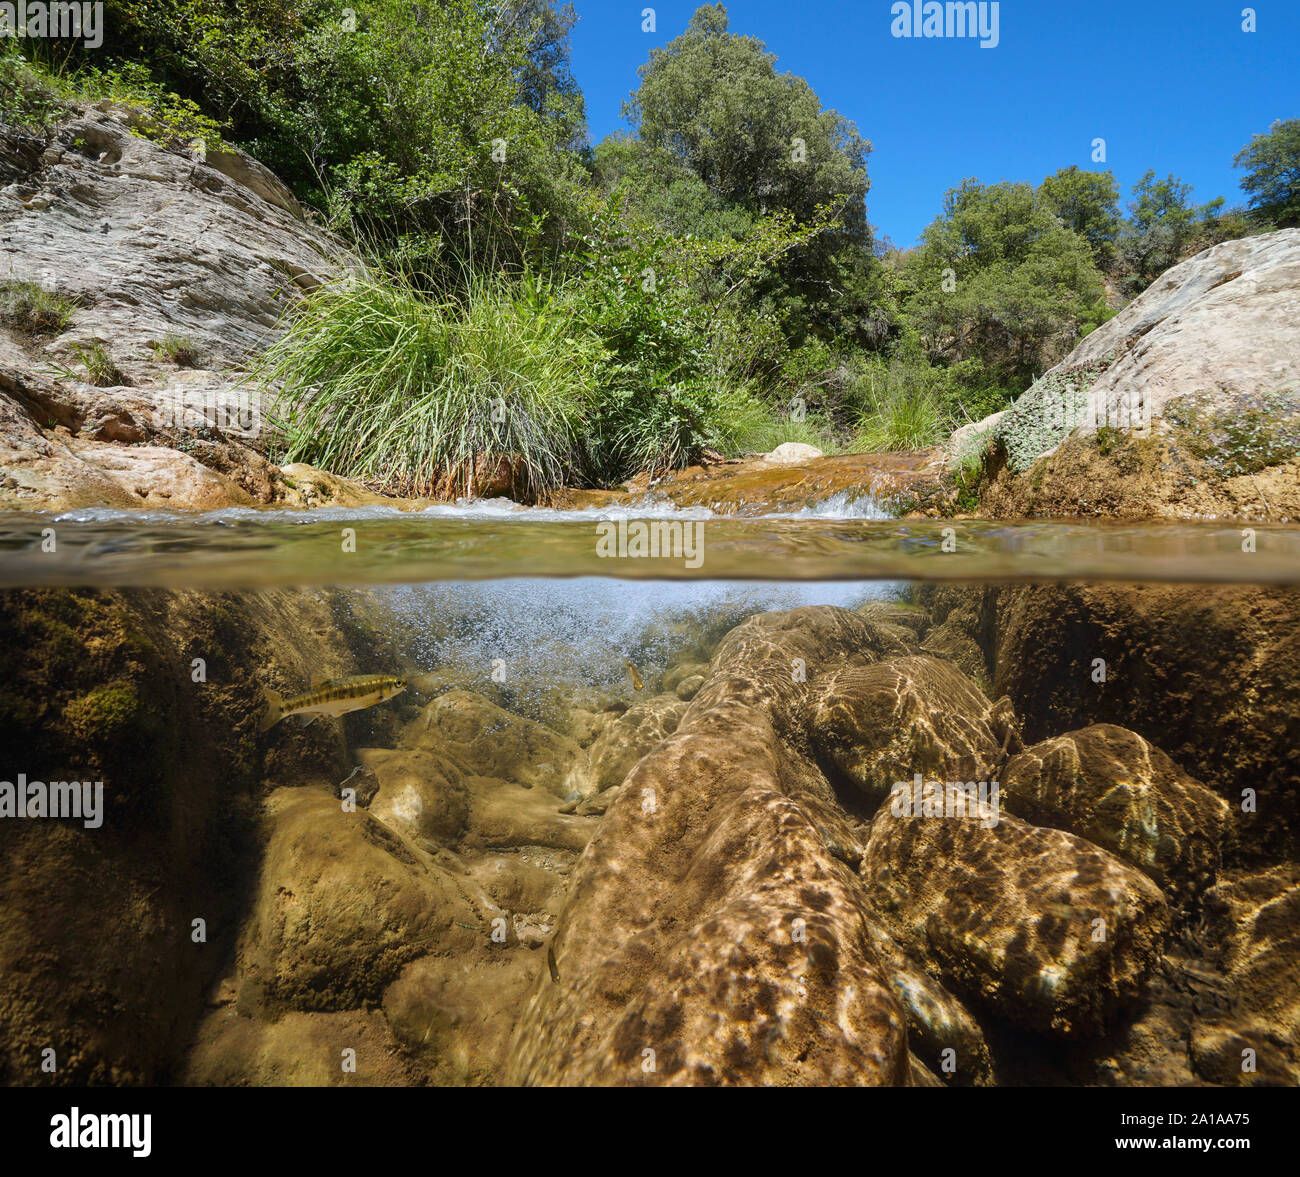 Wild rocky stream with water flowing, split view over and under water surface, Spain, La Muga river, Catalonia Stock Photo